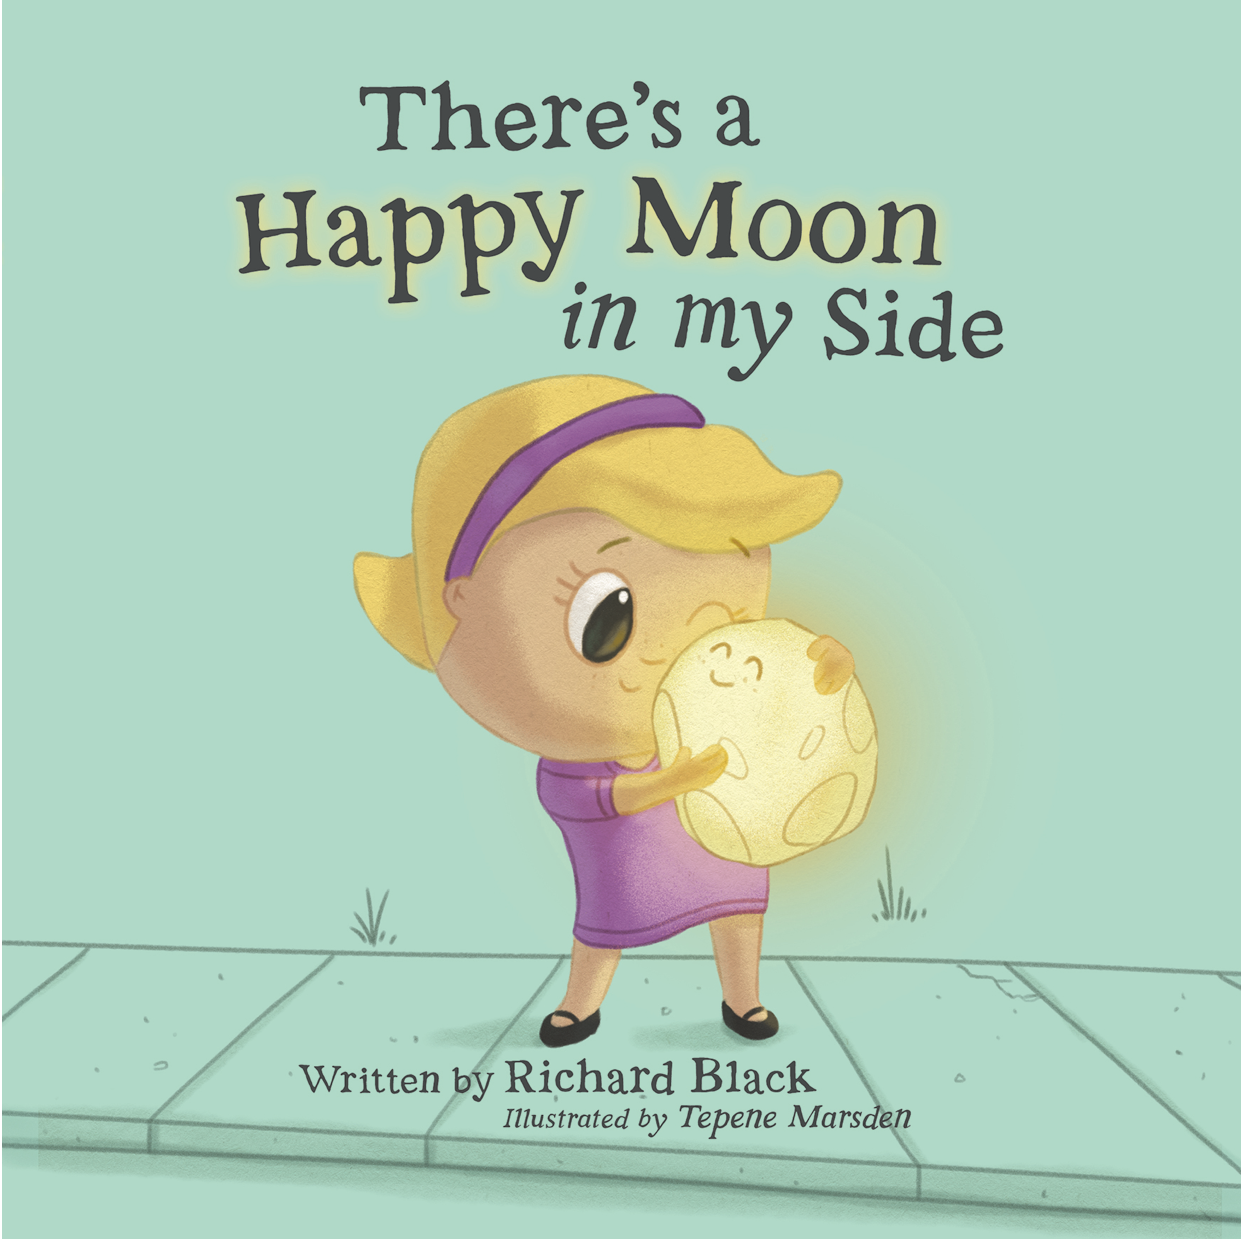 Book: There's a Happy Moon in My Side